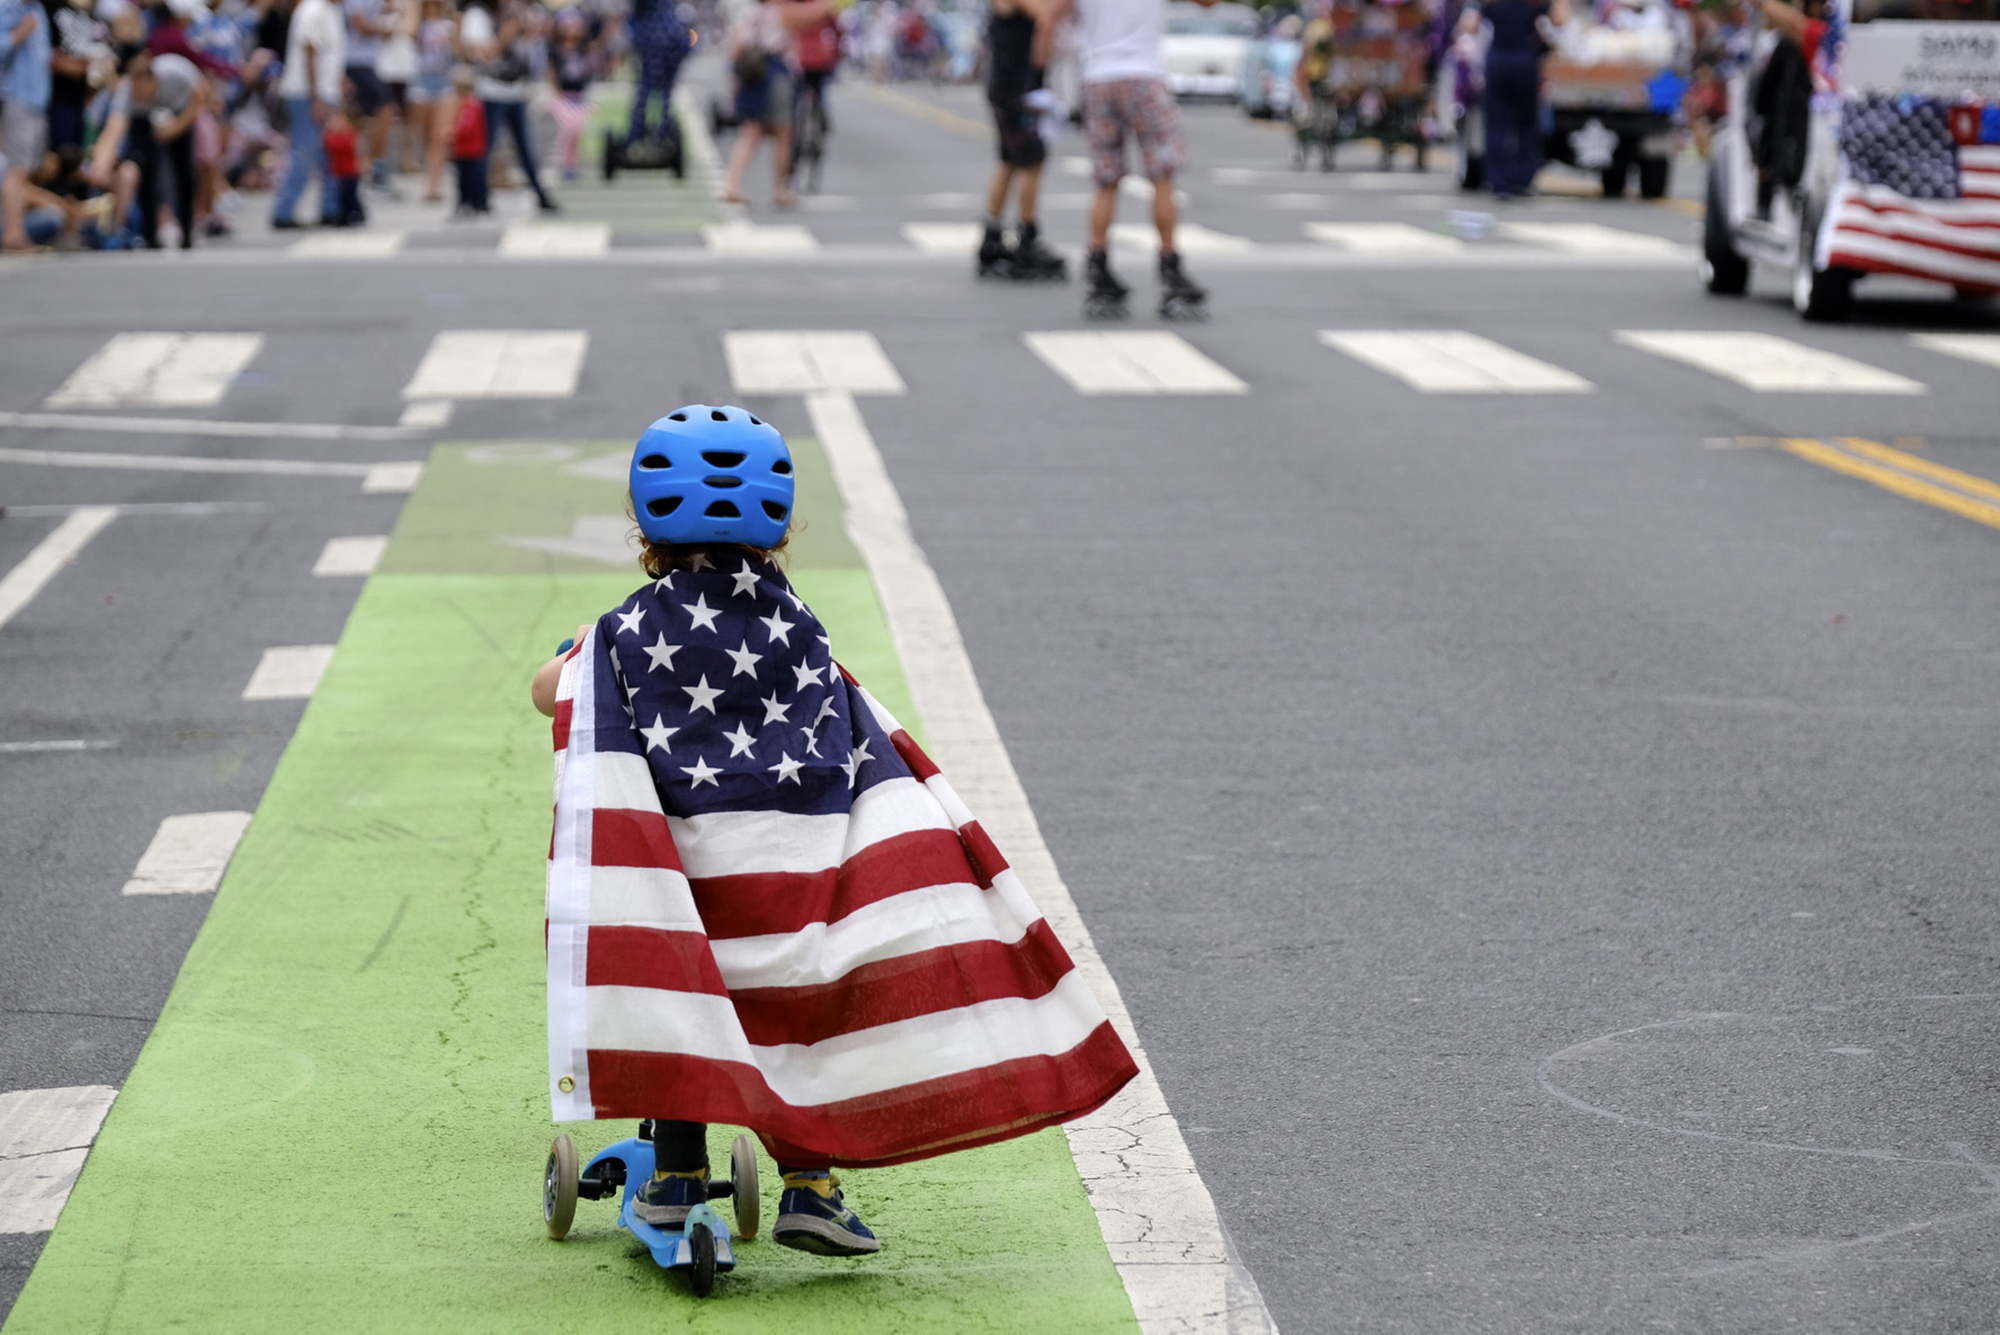 A toddler is seen from behind riding a scooter with a blue helmet on and wearing an American flag like a cape.